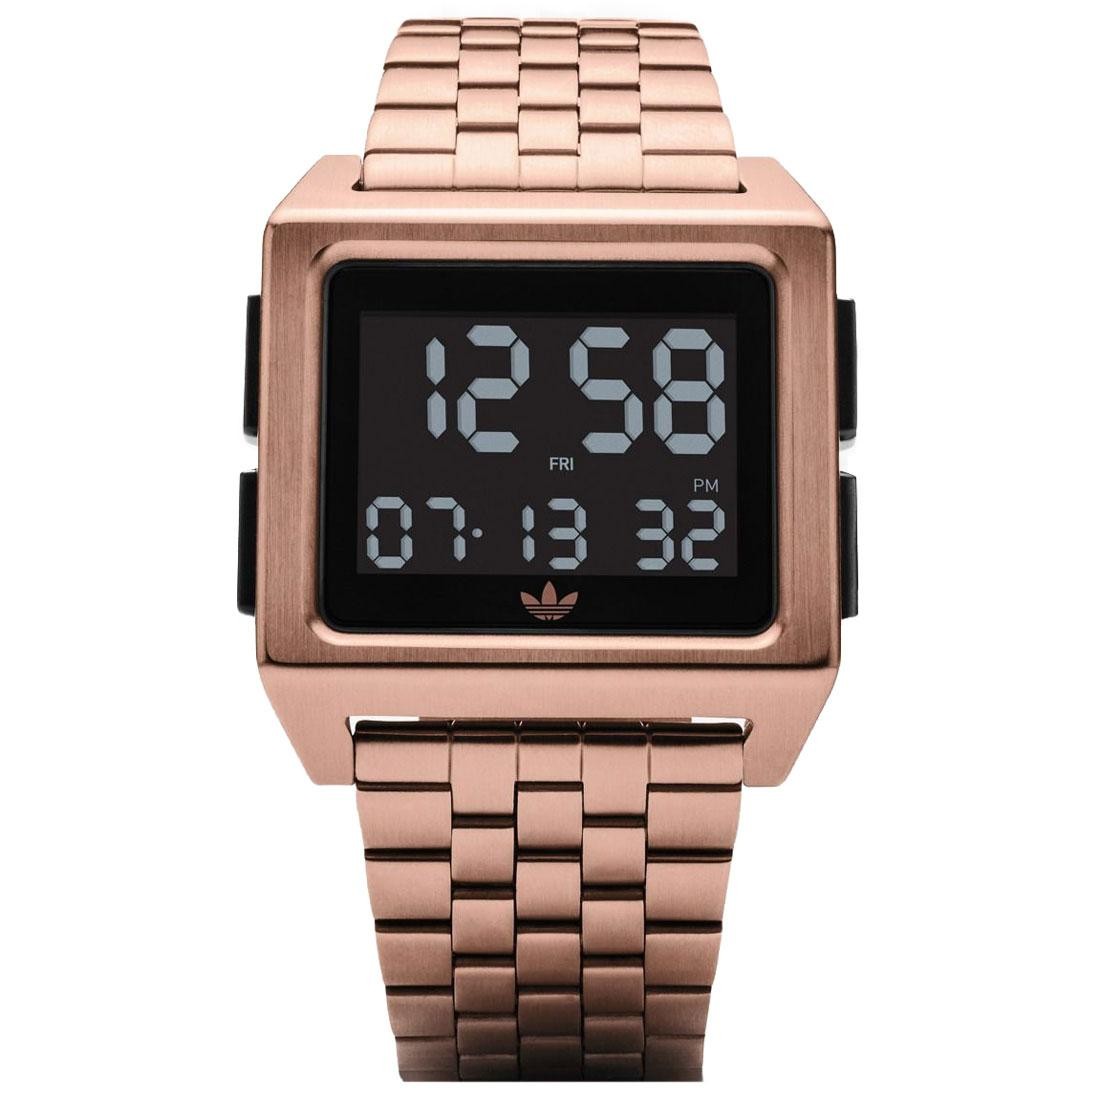 Adidas Archive M1 Watch (gold / rose gold / black)